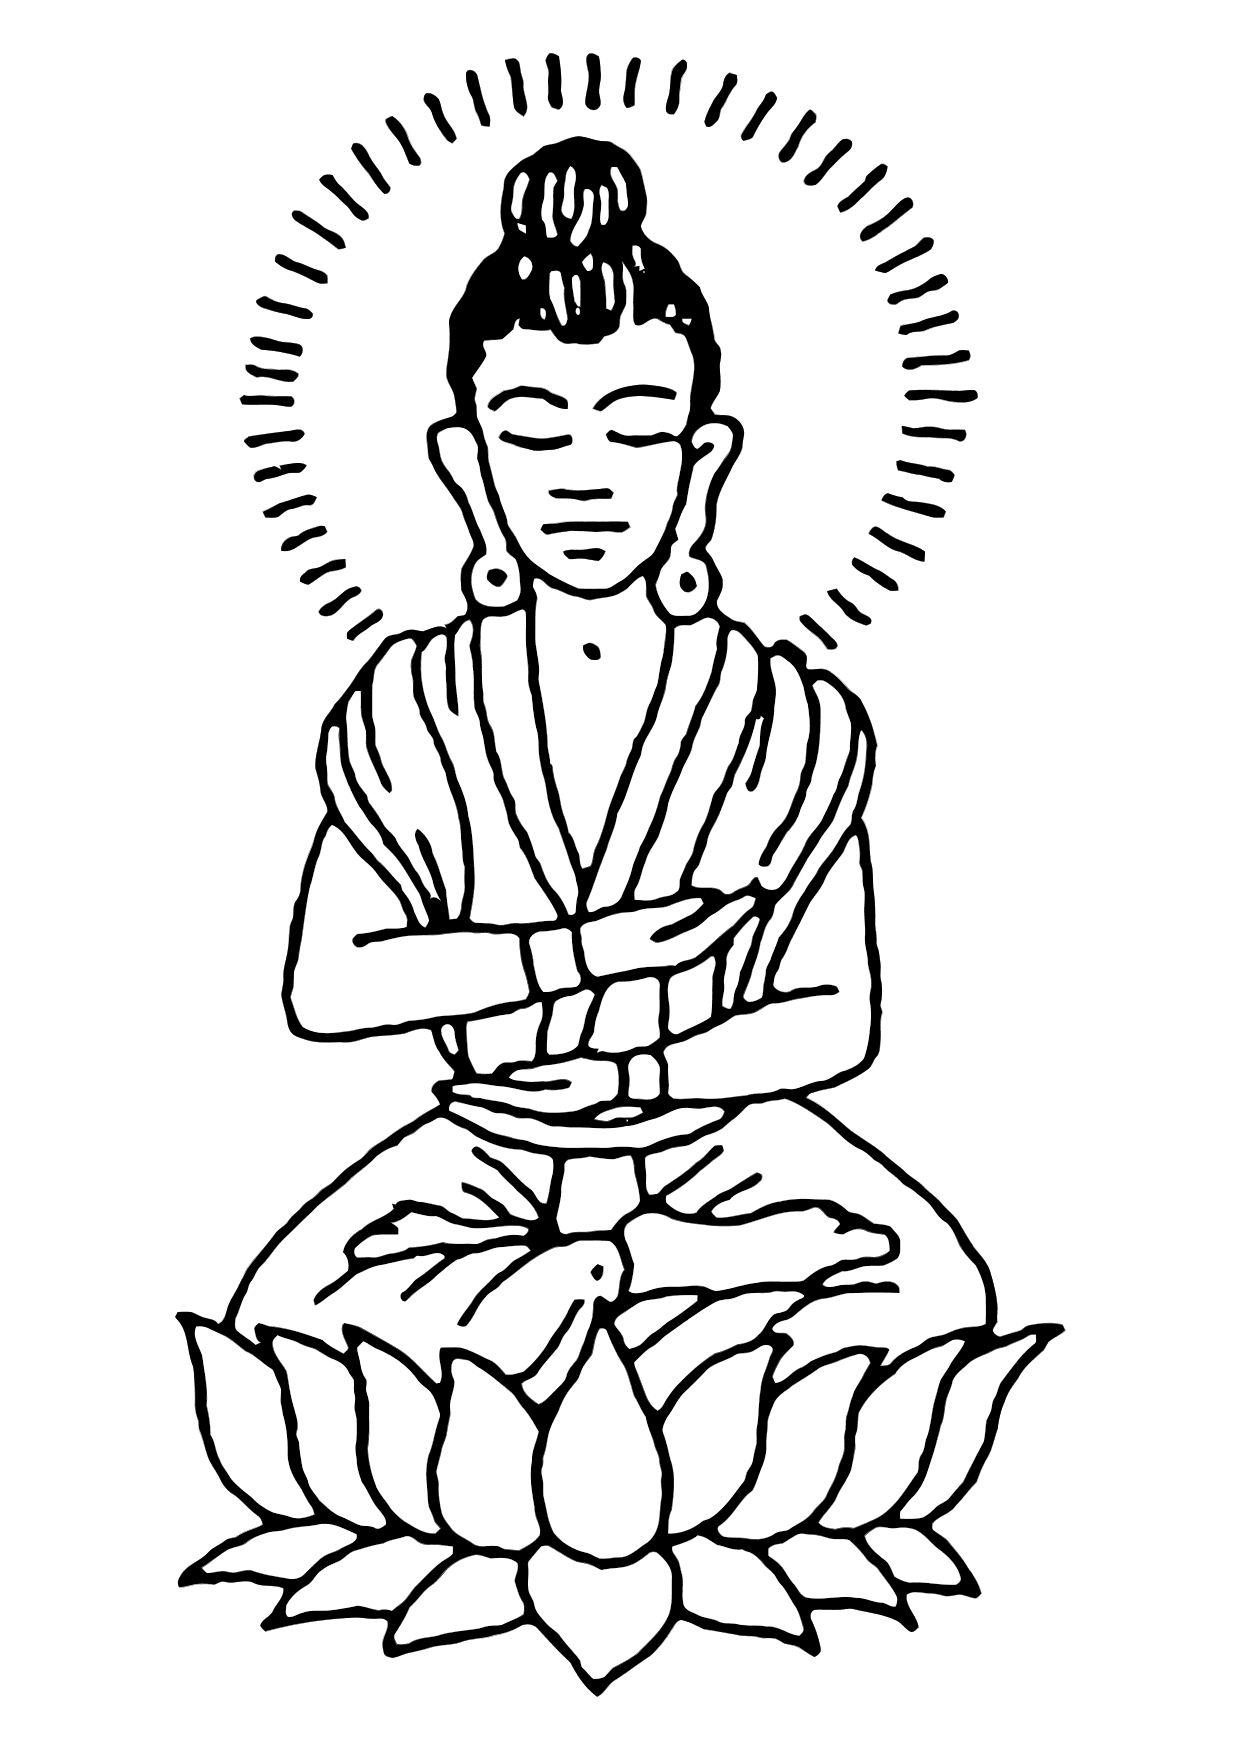 The Buddha coloring page